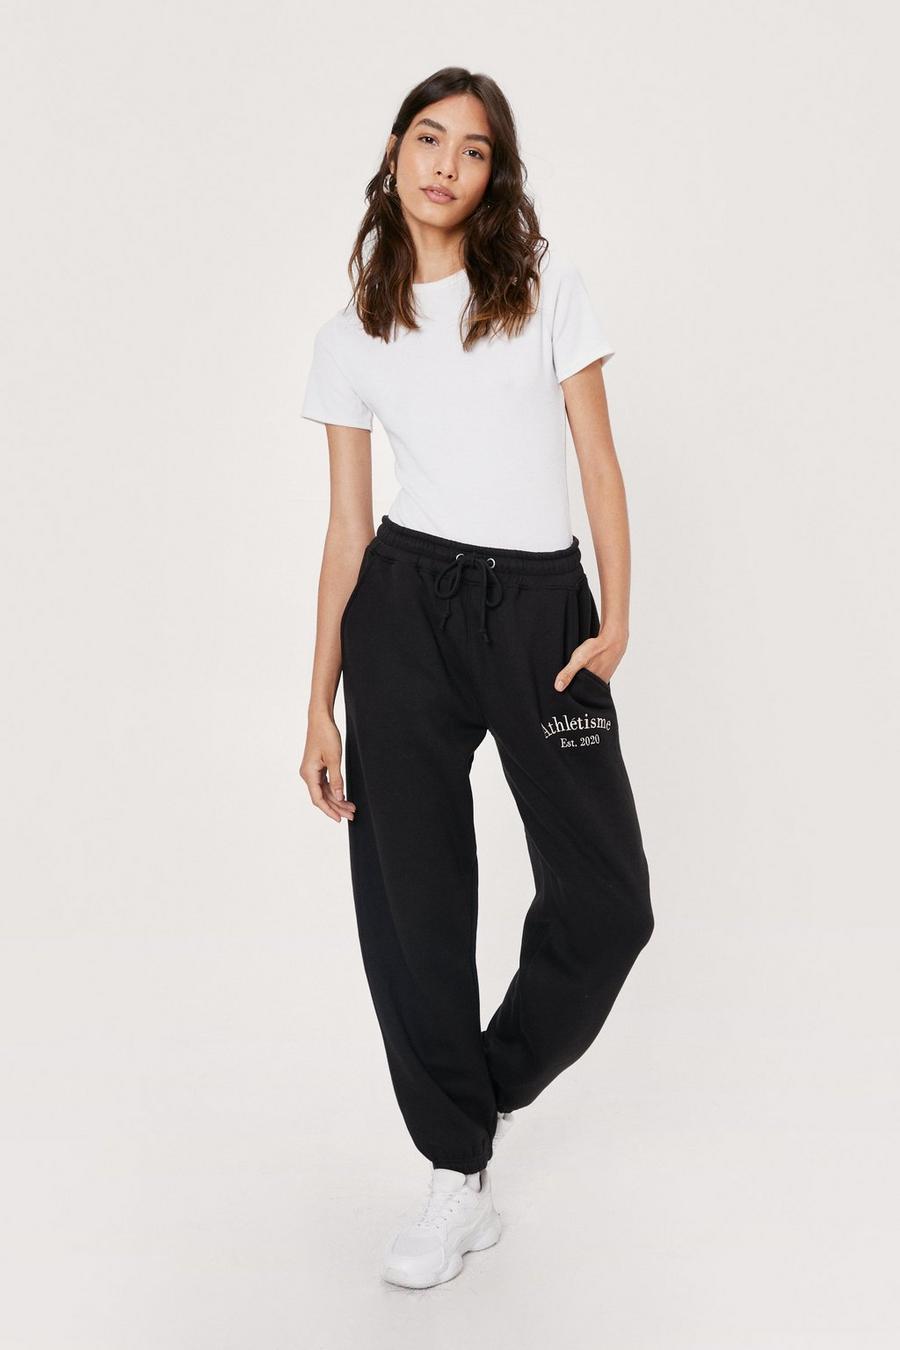 Athletisme Relaxed Fit Jogger